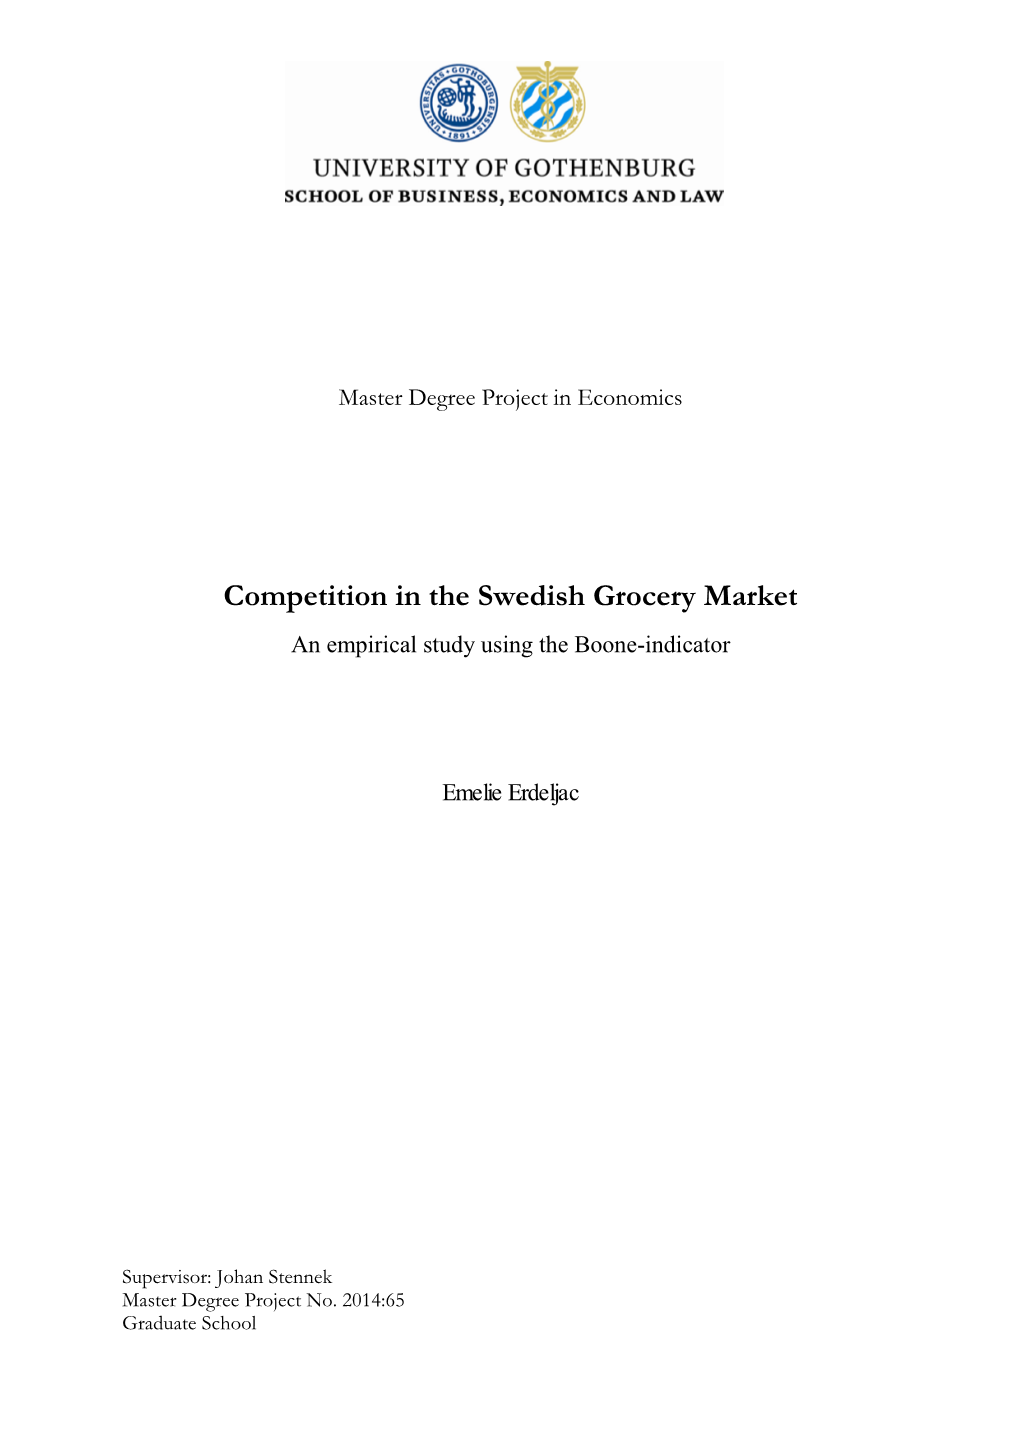 Competition in the Swedish Grocery Market an Empirical Study Using the Boone-Indicator